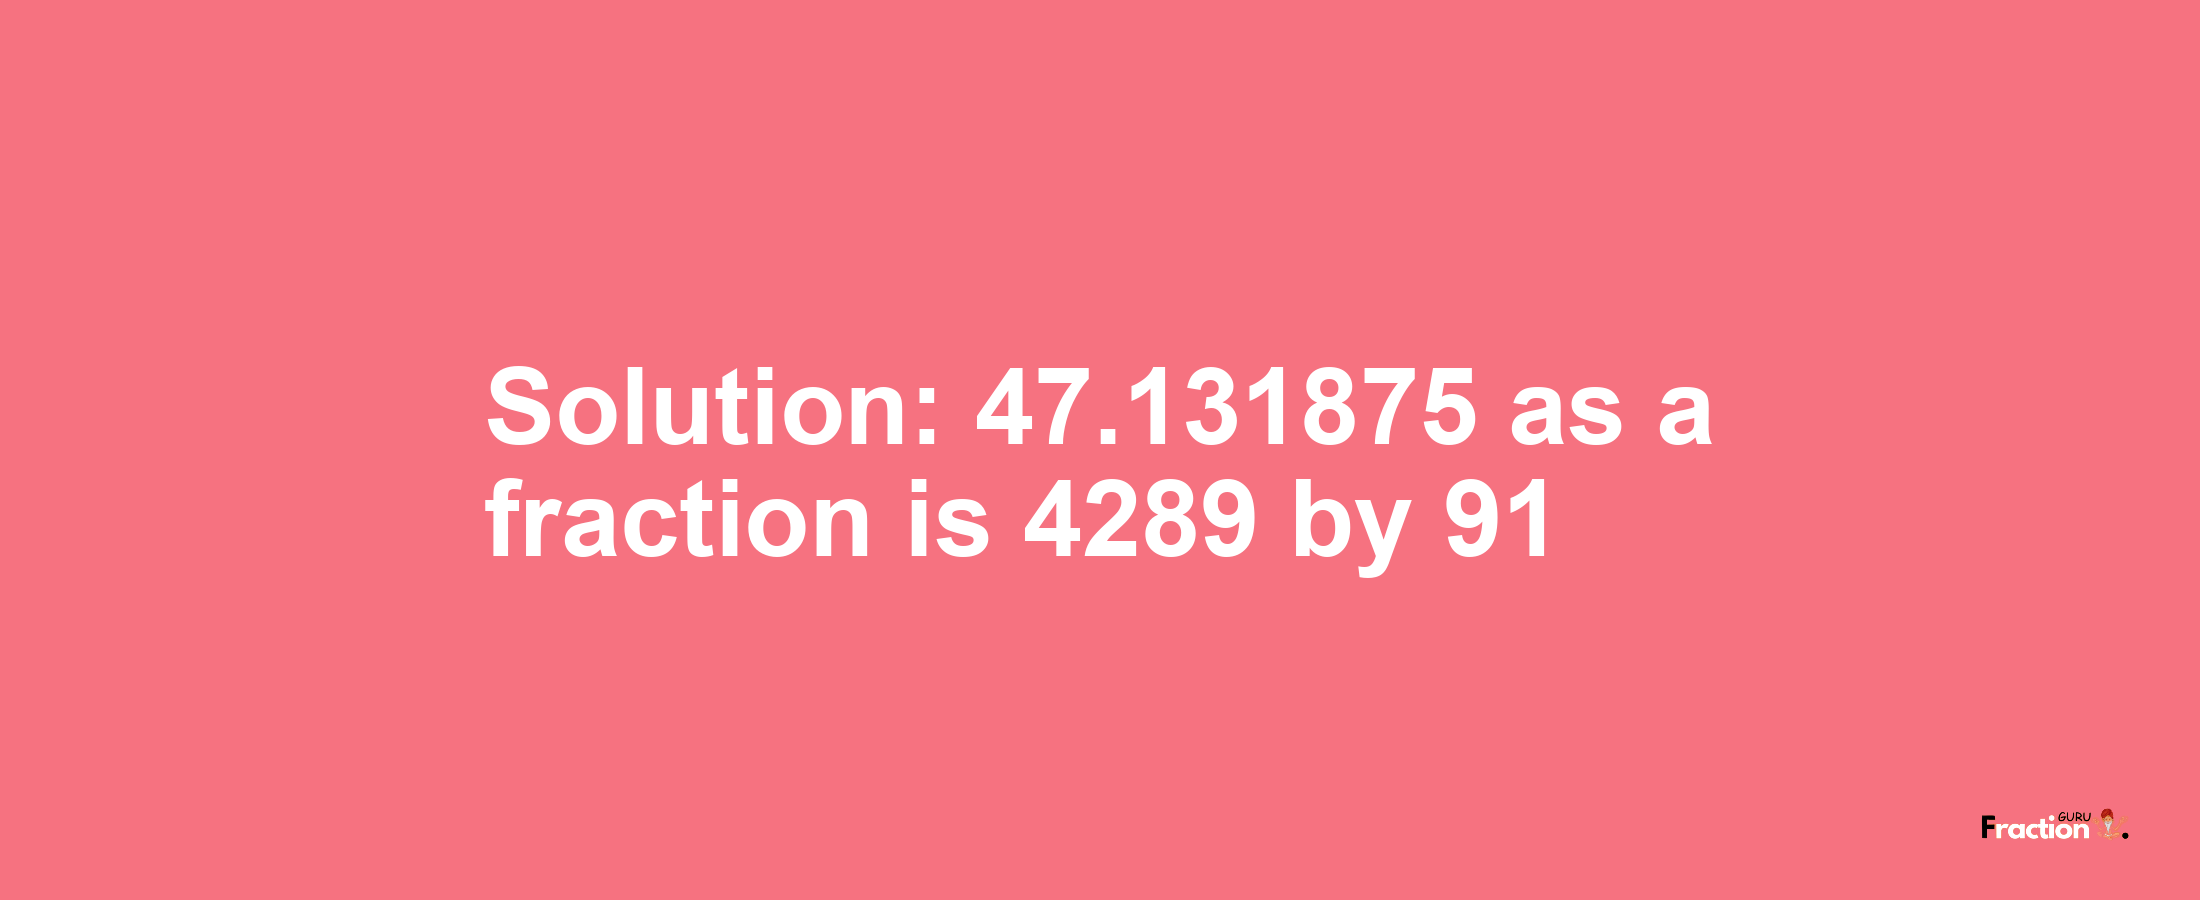 Solution:47.131875 as a fraction is 4289/91